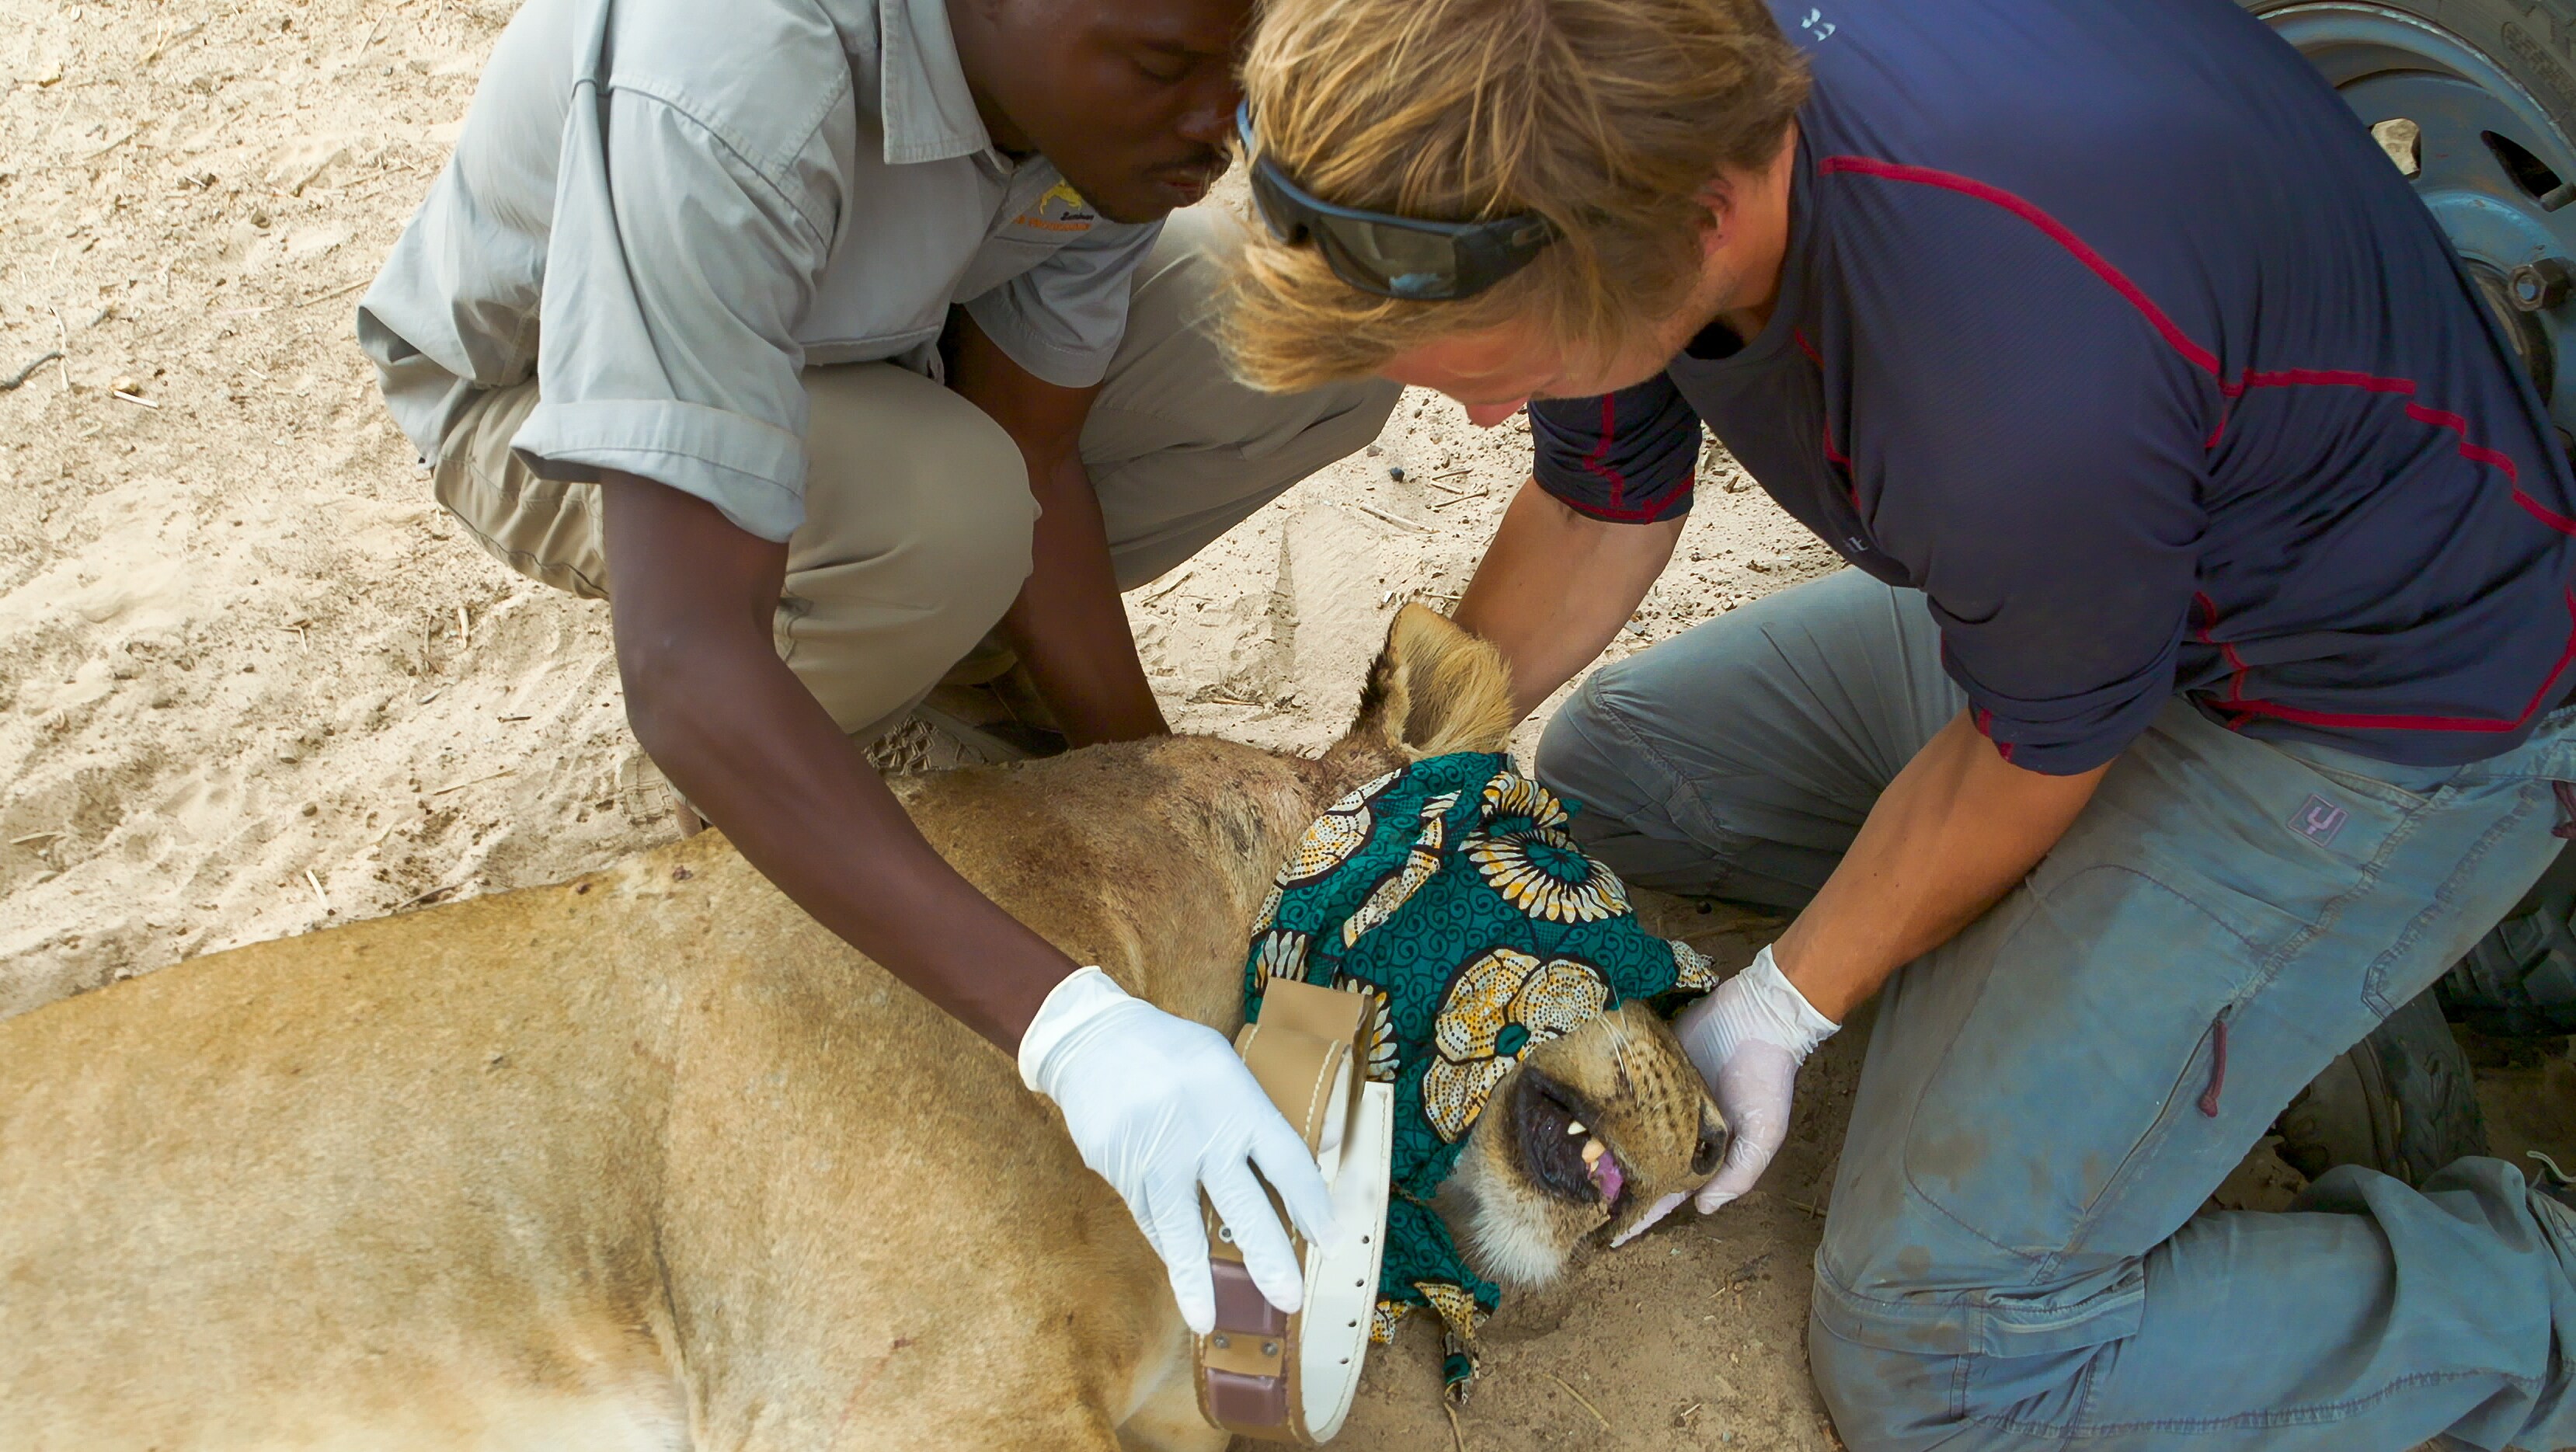 Bertie Gregory (R) helping to collect invaluable data on the lions in South Luangwa National Park. (Credit: National Geographic/George Pagliero for Disney+)